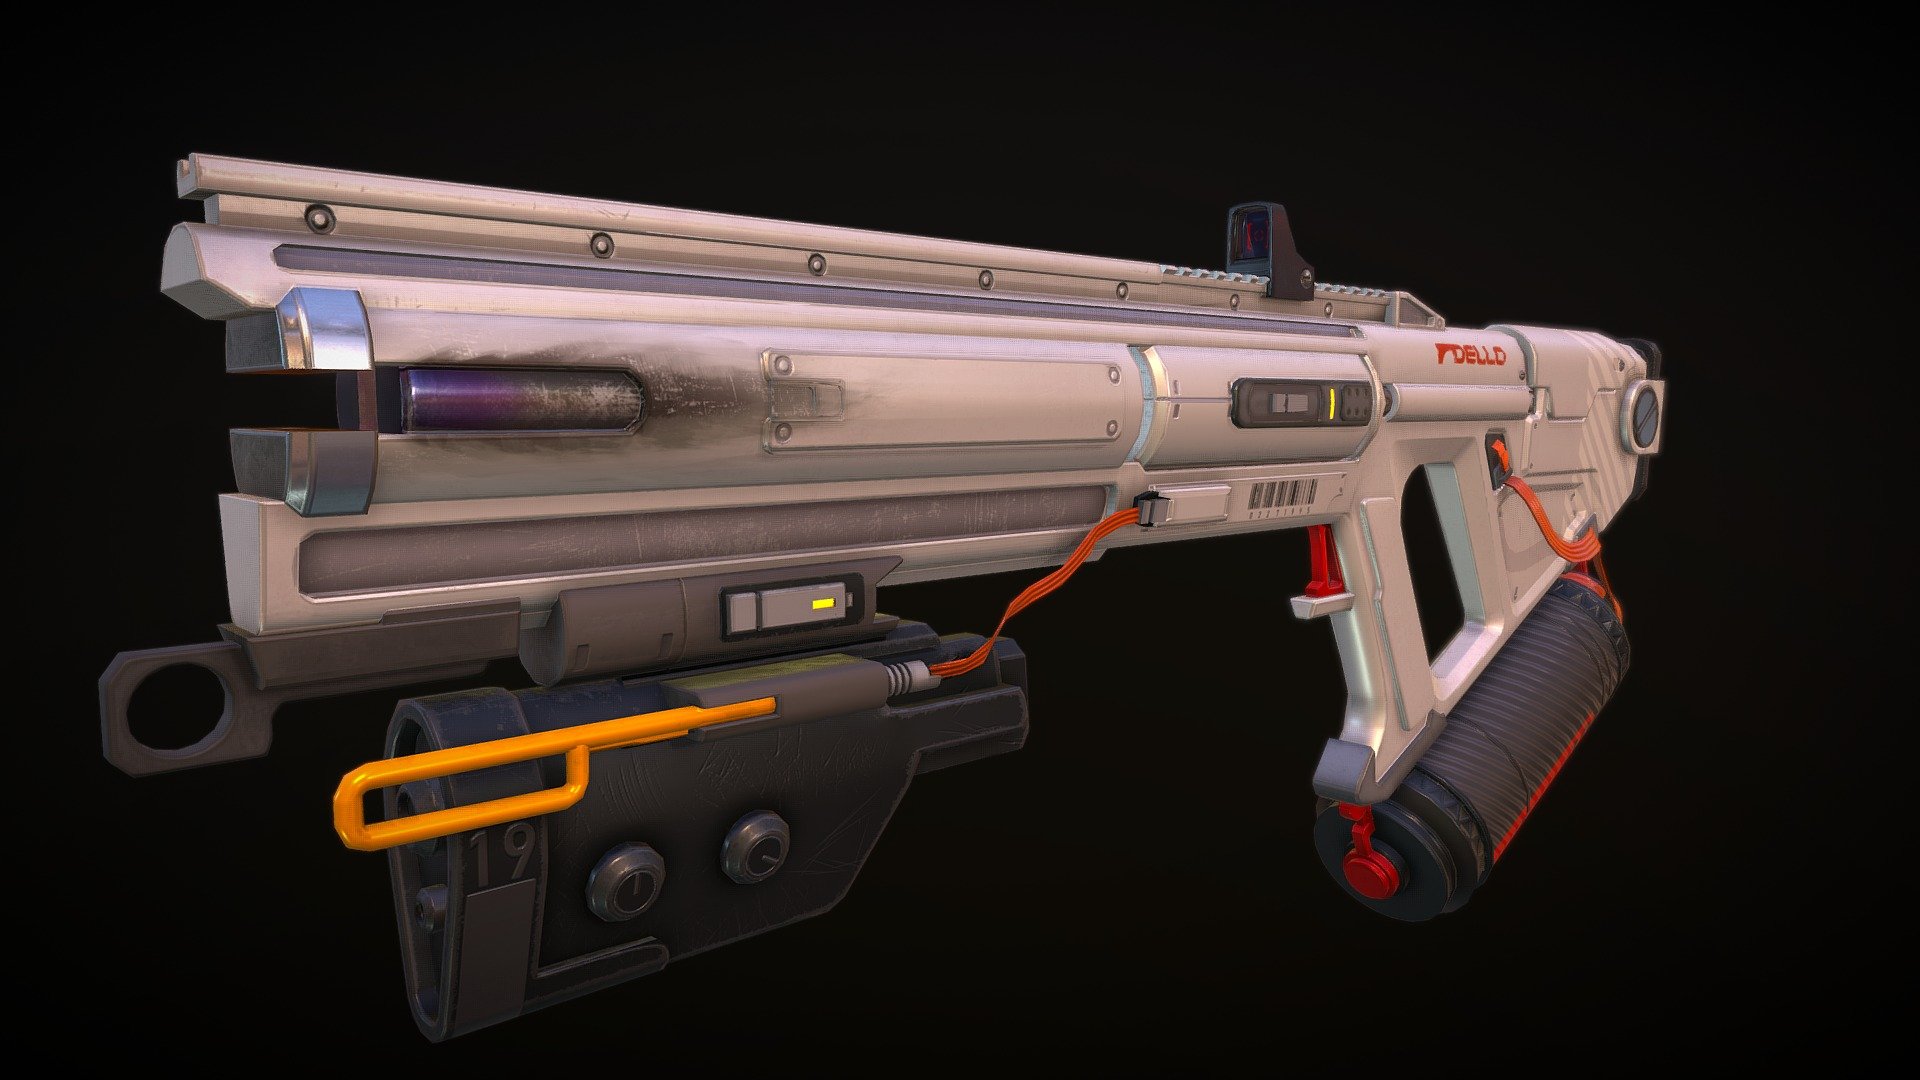 Modeled after a weapon design by Lapo Roccella here: https://www.artstation.com/artwork/weVZV

Also inspired by the weapon foundries of Destiny 3d model